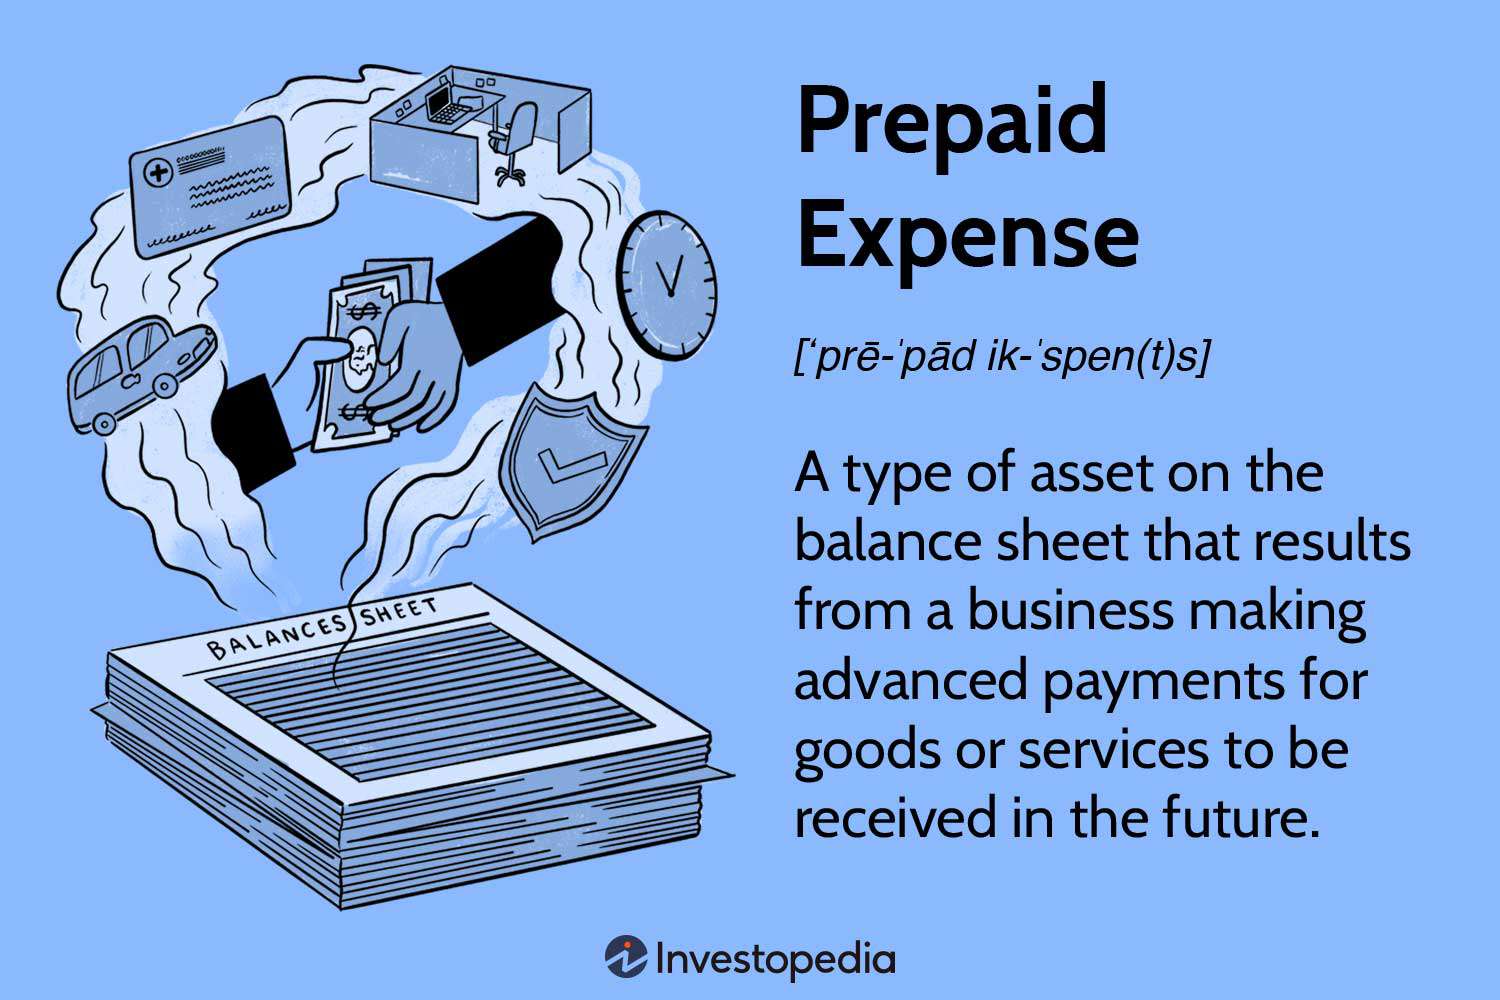 which of the following accounts is considered a prepaid expense?